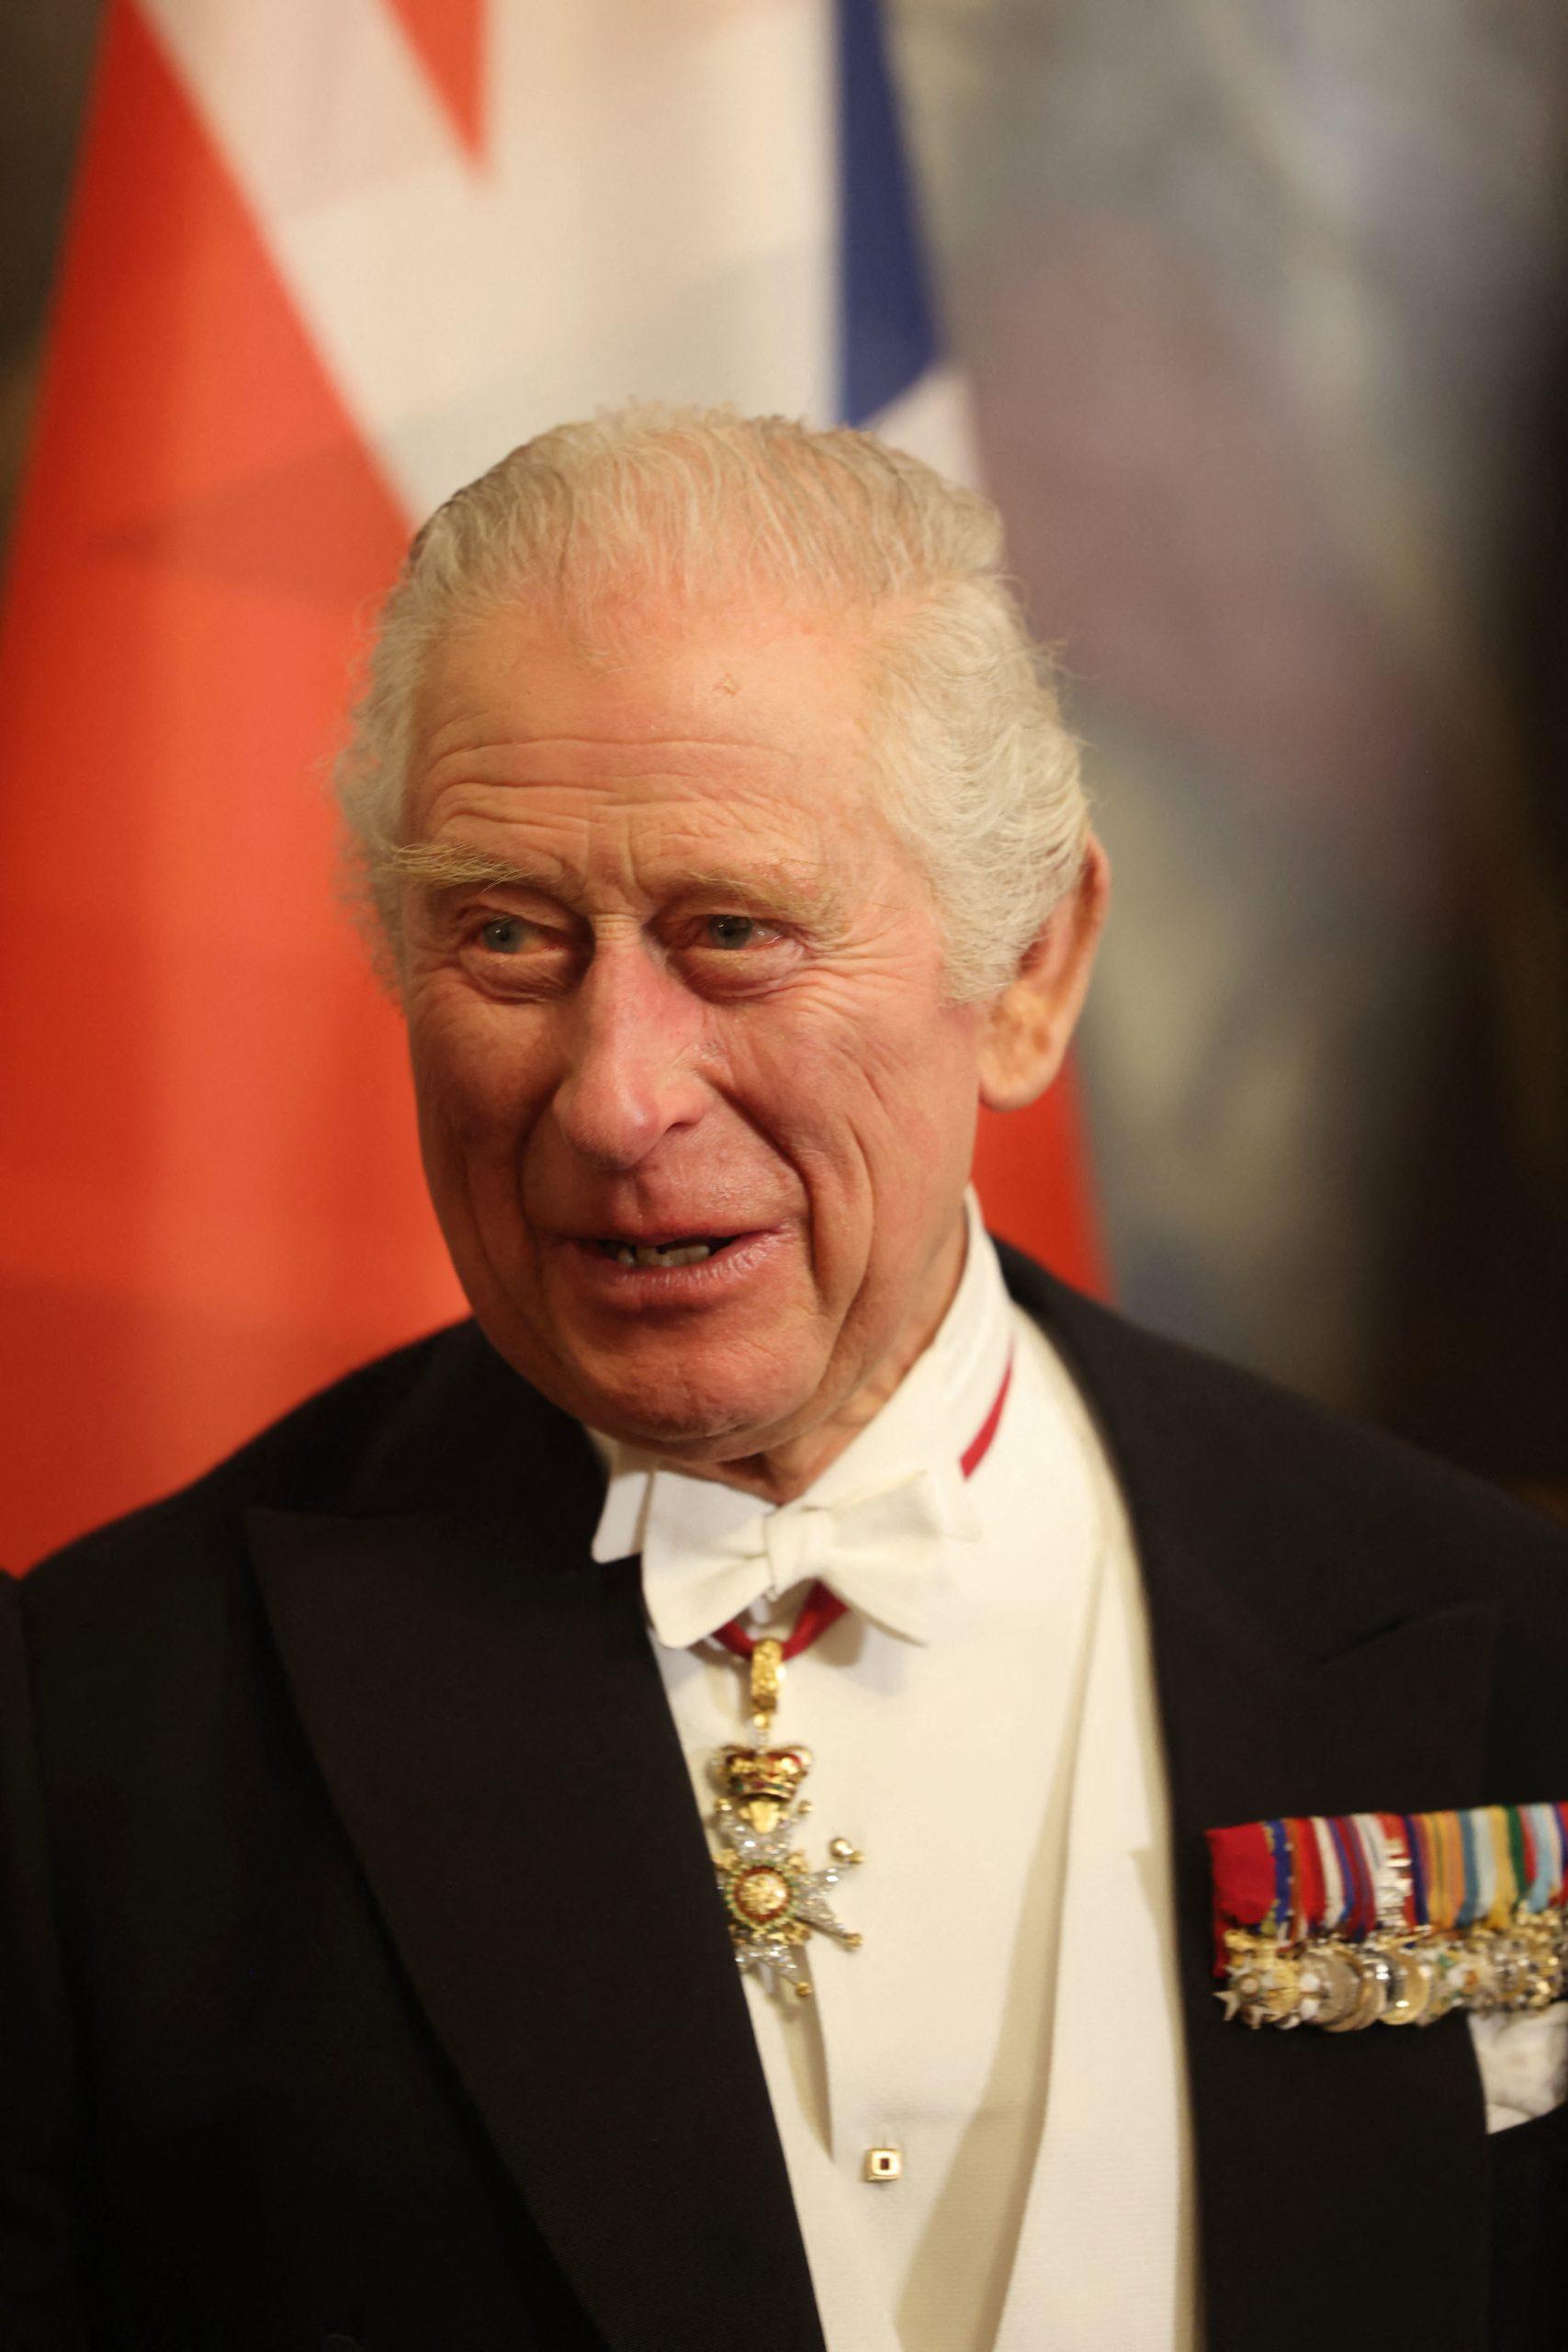 King Charles III state visit to Germany - Day 1